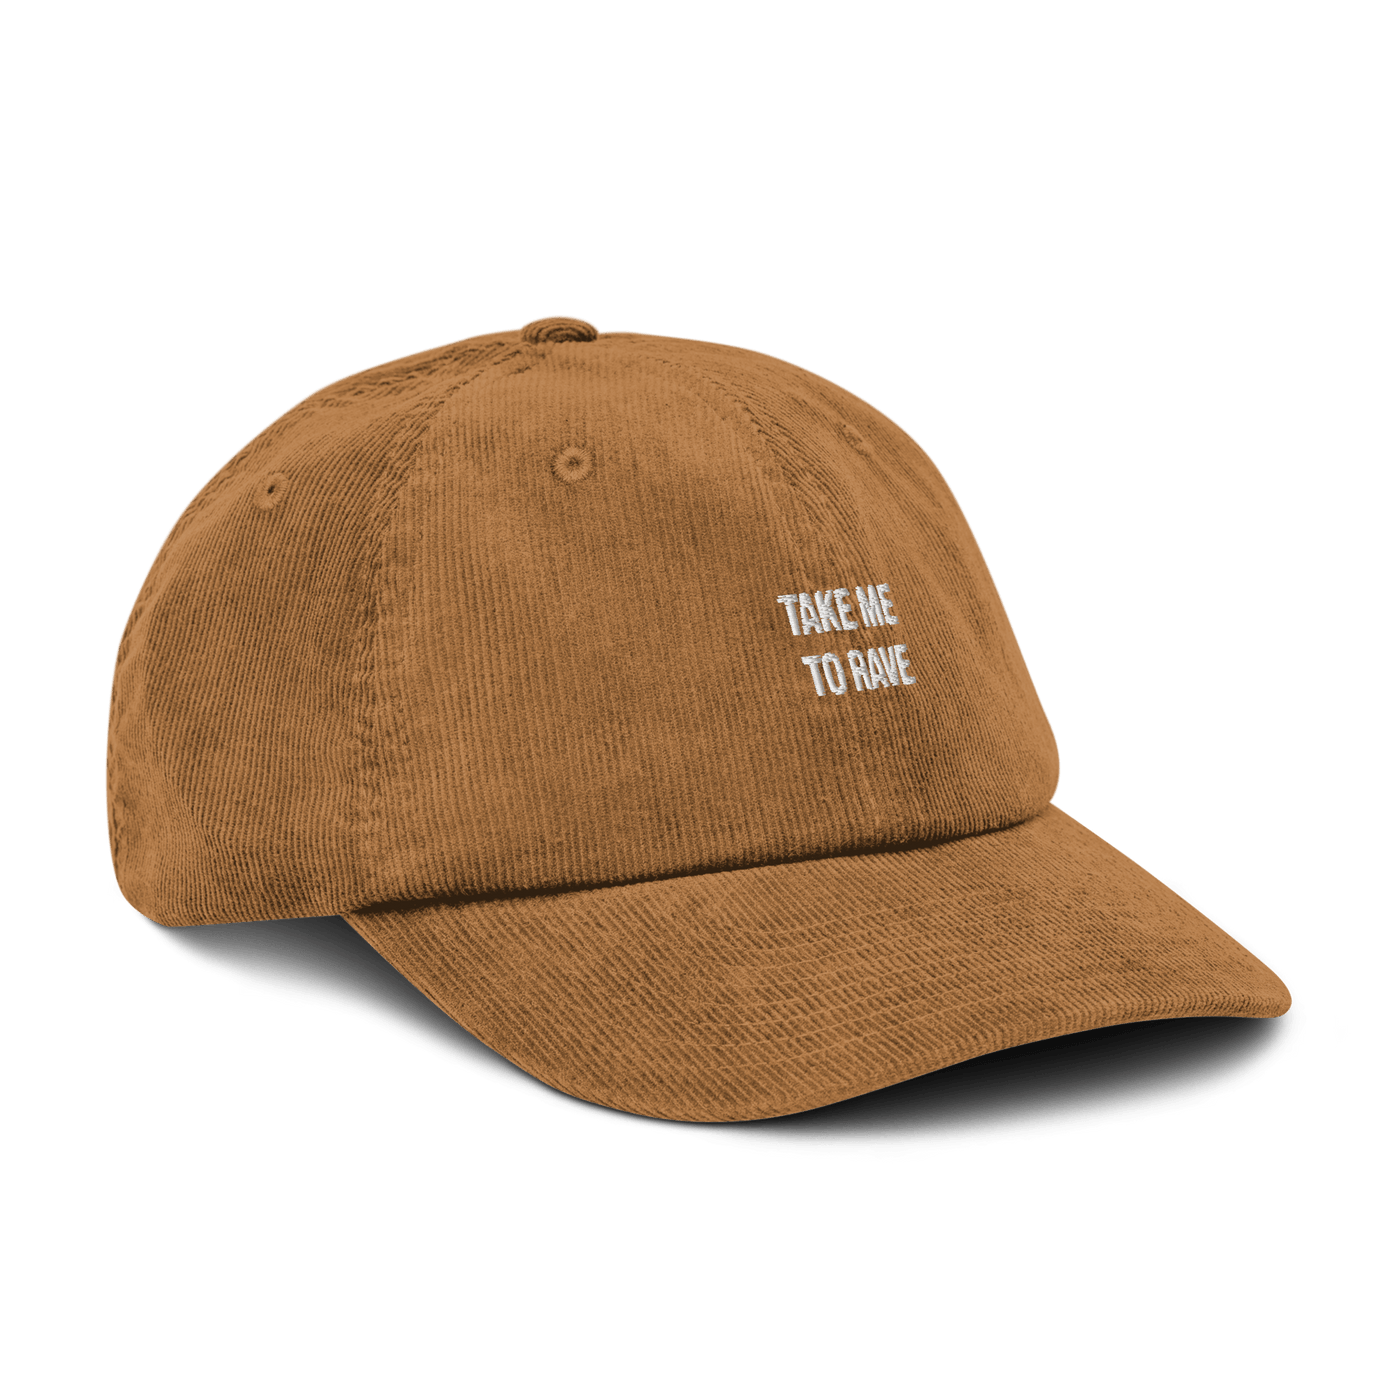 Take me to rave Corduroy hat - Camel - - Just Another Cap Store